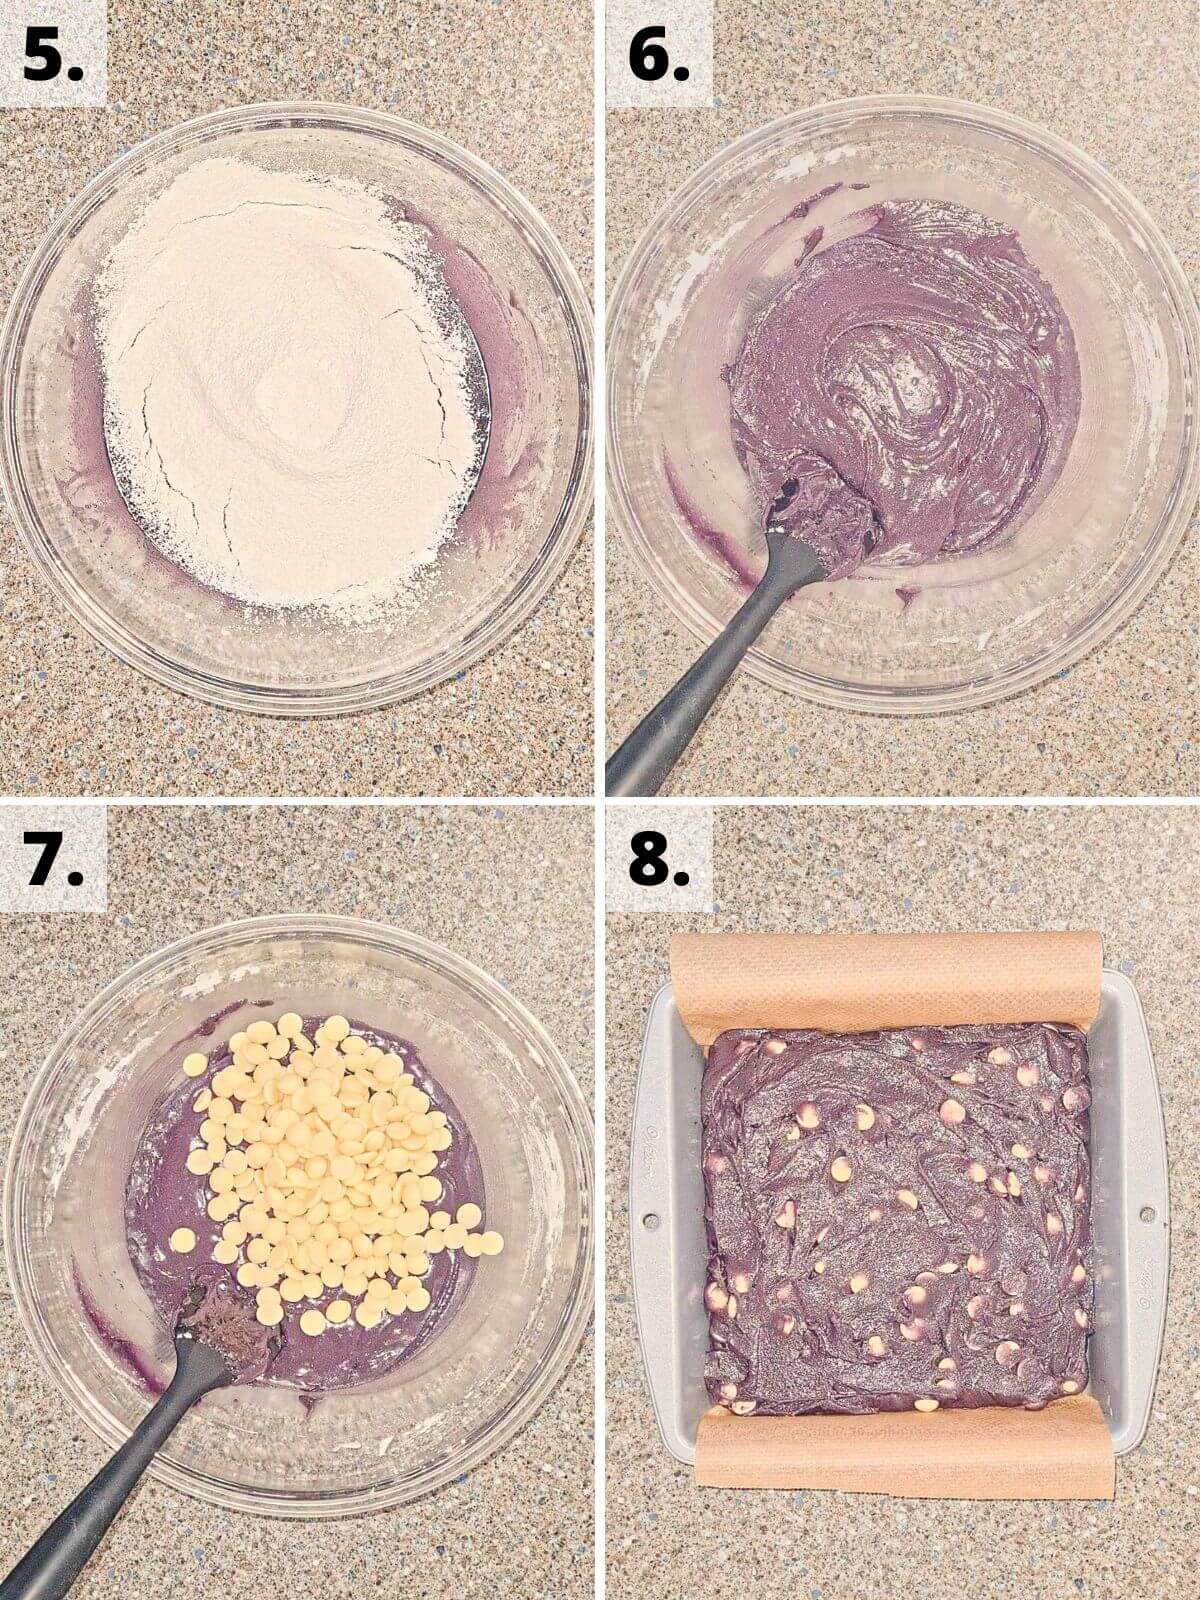 how to make ube brownies recipe method steps 5 to 8.